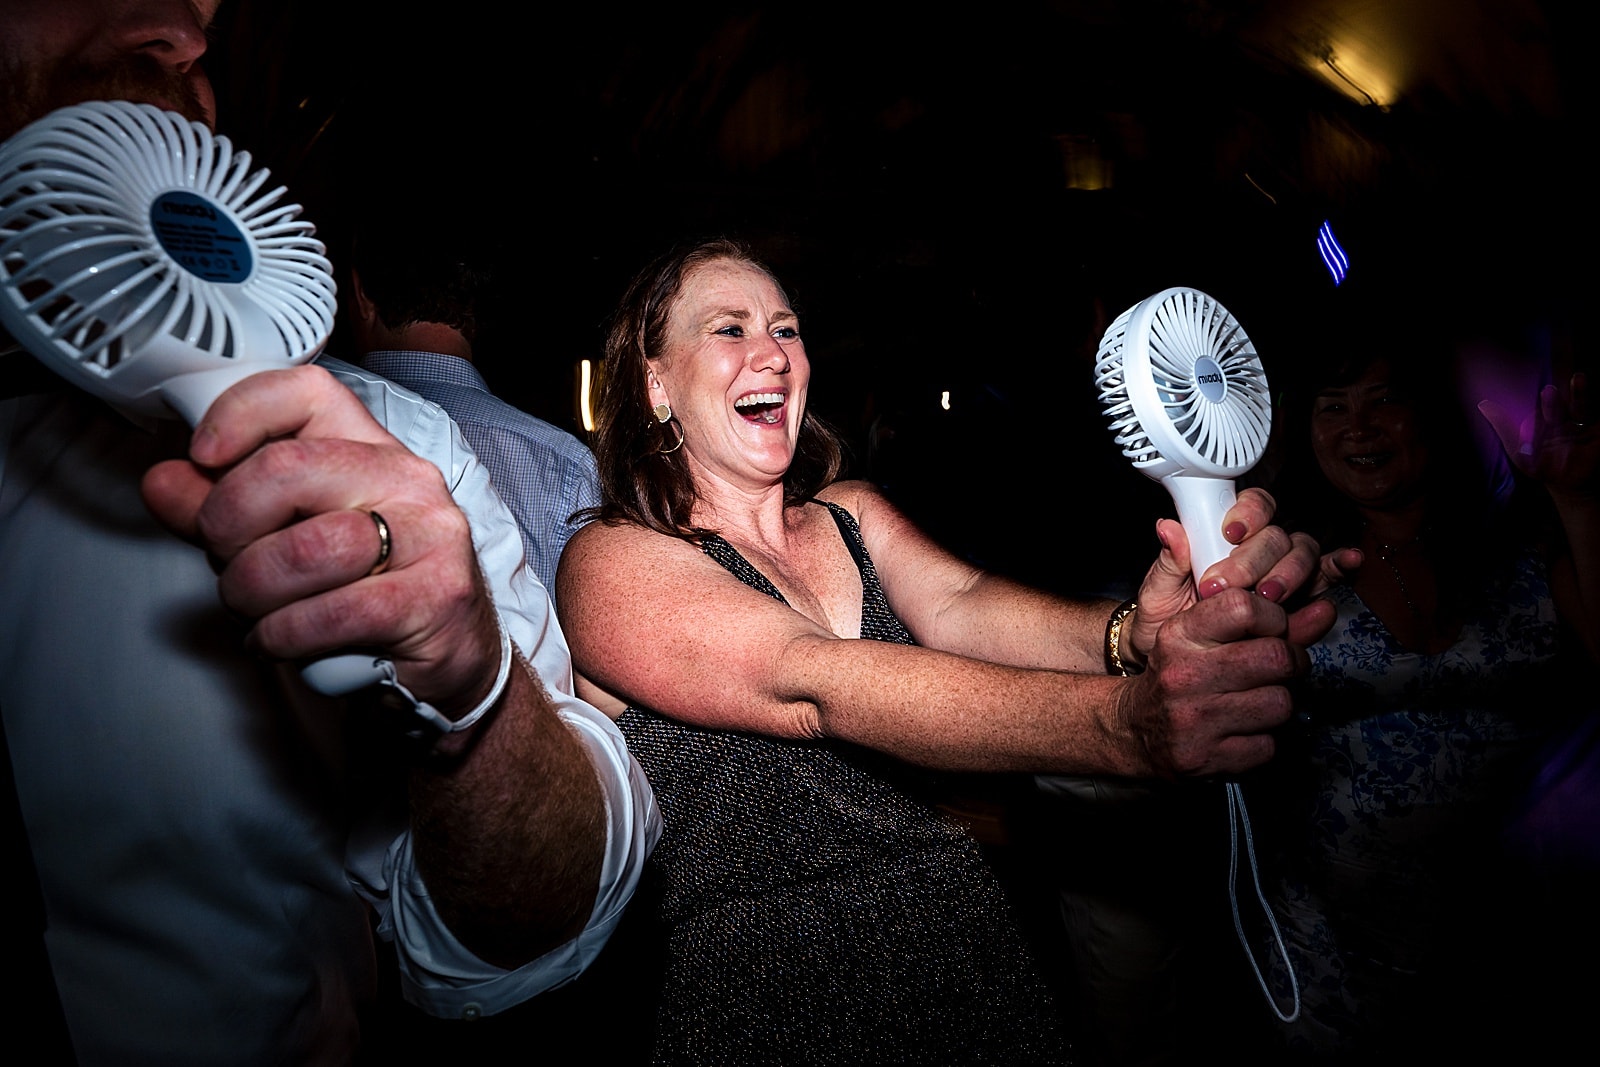 summer wedding? consider having some portable fans for your guests